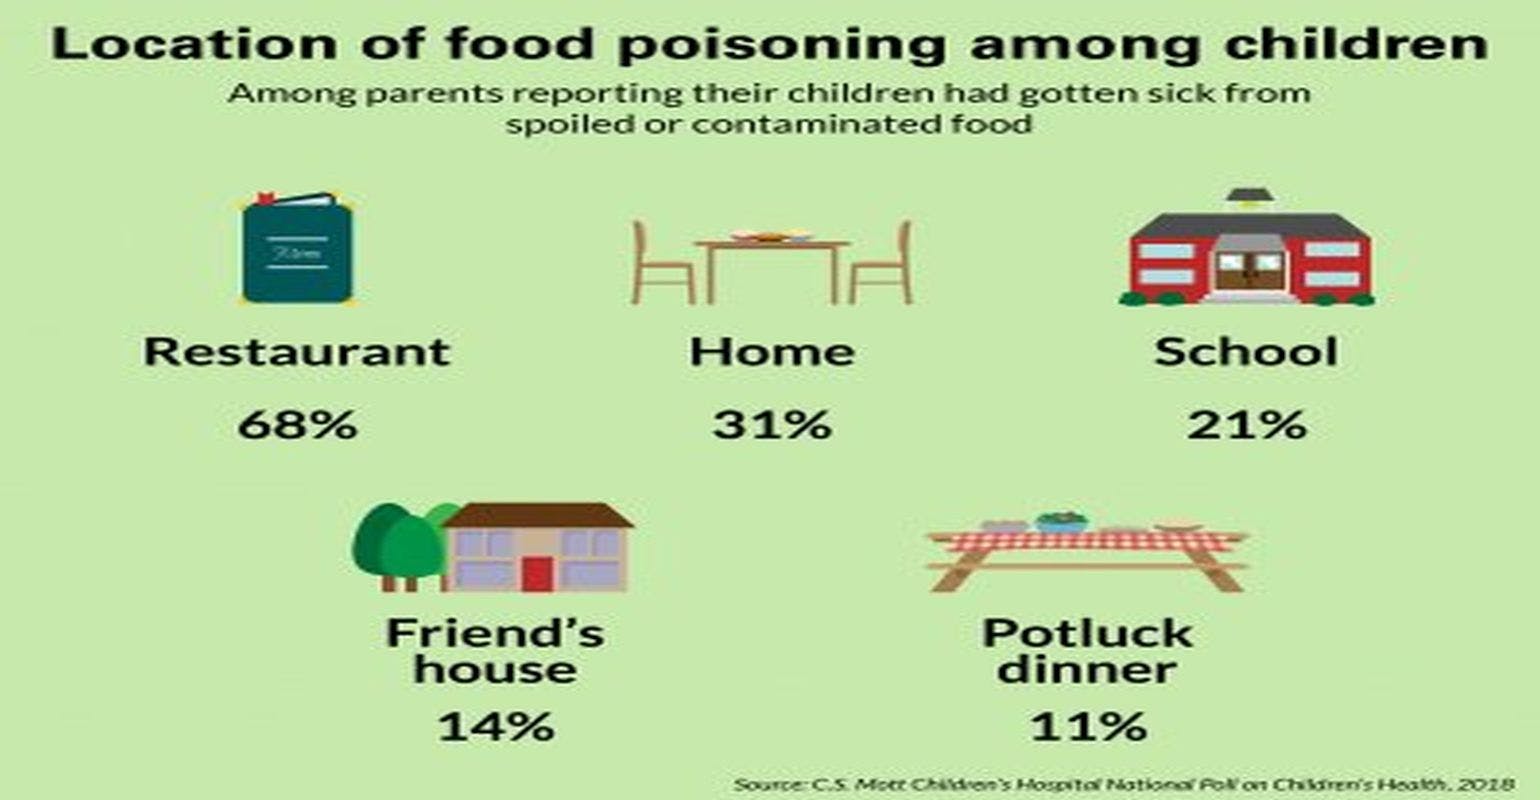 1 in 10 Parents Say Their Child Has Gotten Sick From Spoiled or Contaminated Food